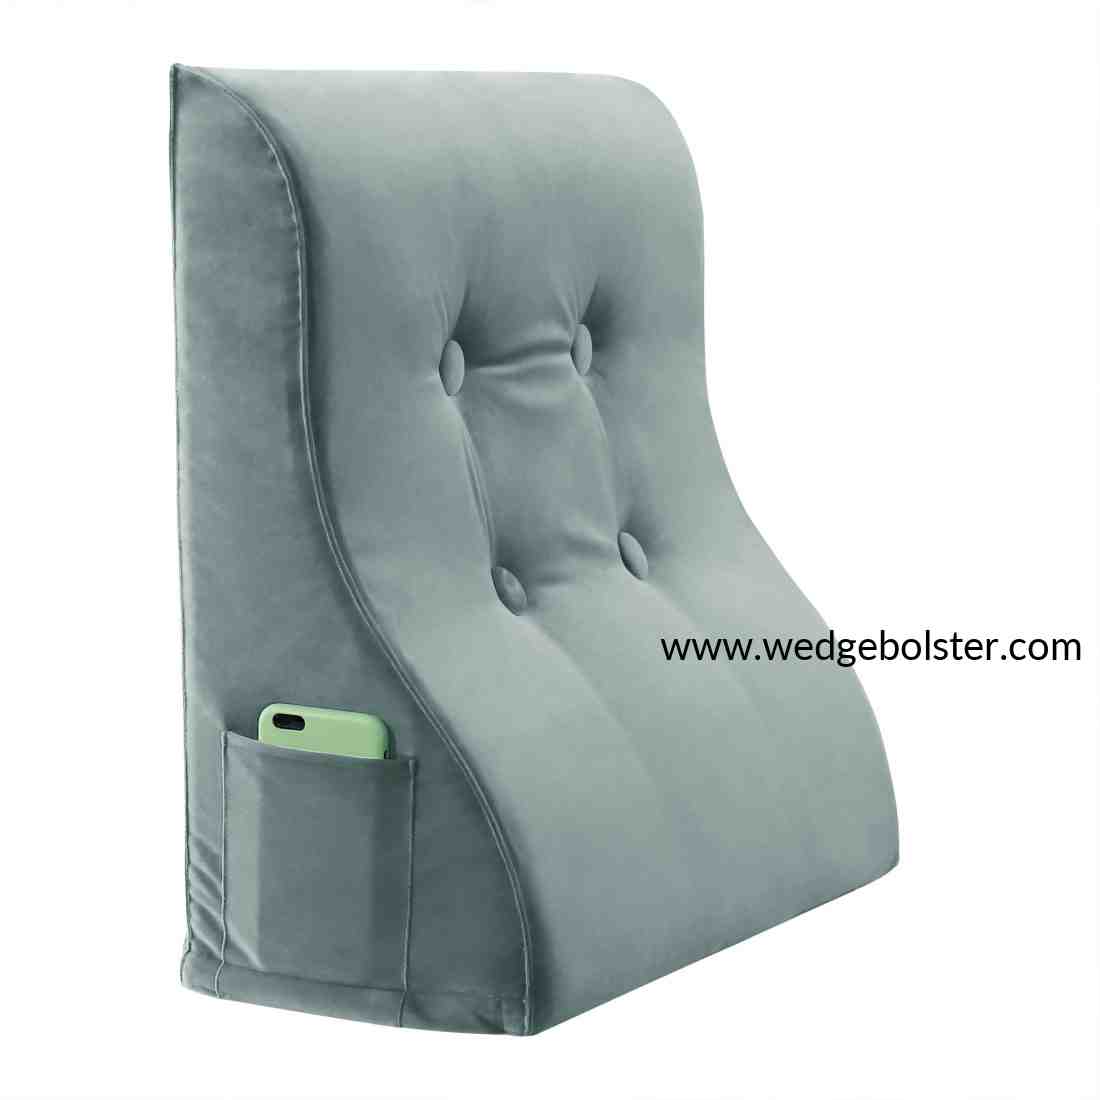 Best Back Support Cushion 2022